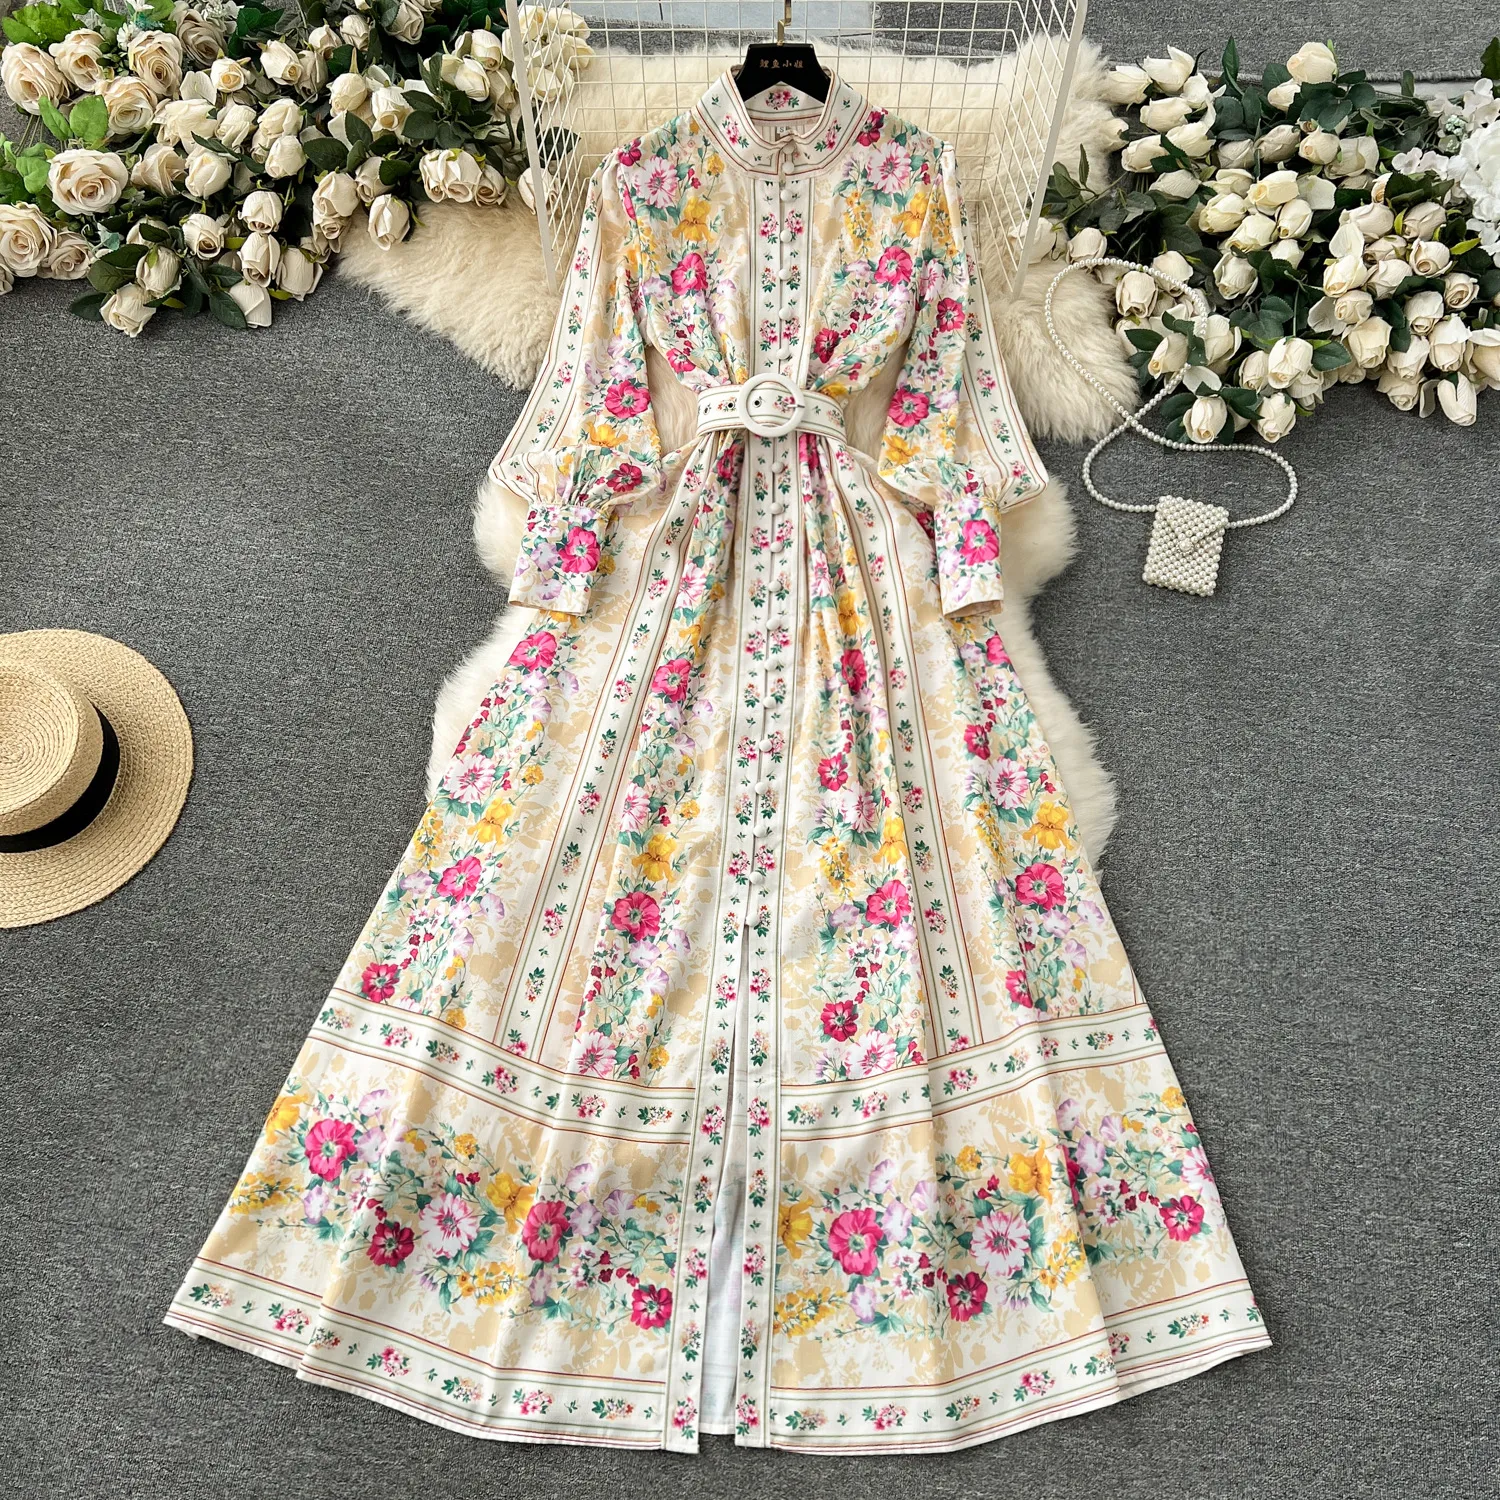 European style retro court style dress design with a printed and elegant stand up collar, slim fit, and a high-end and elegant dress